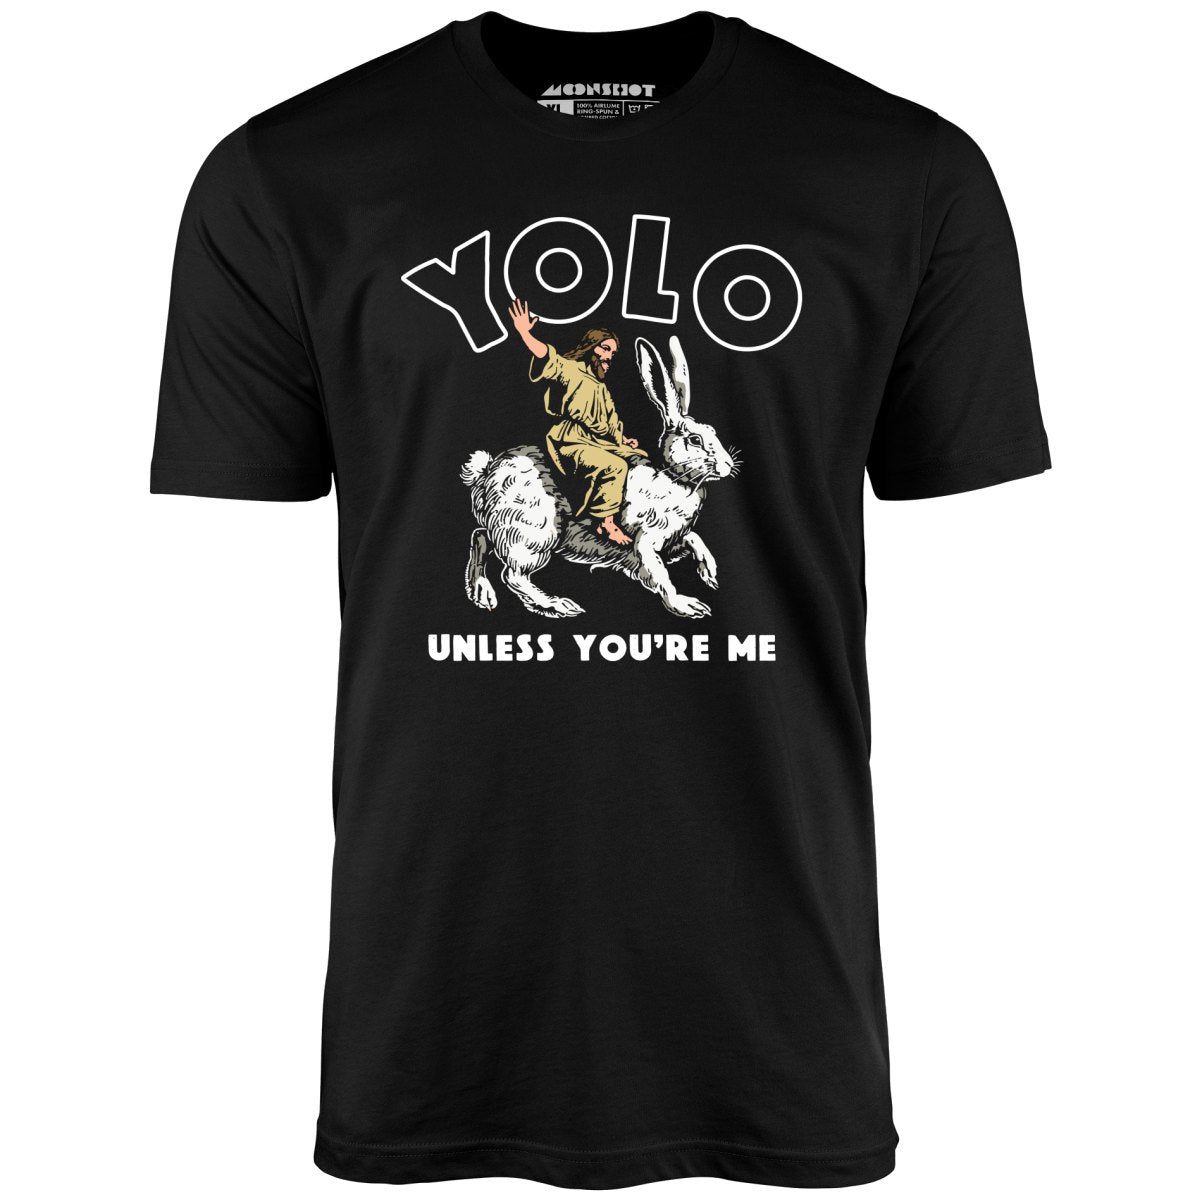 Yolo - Unless You're Me - Unisex T-Shirt